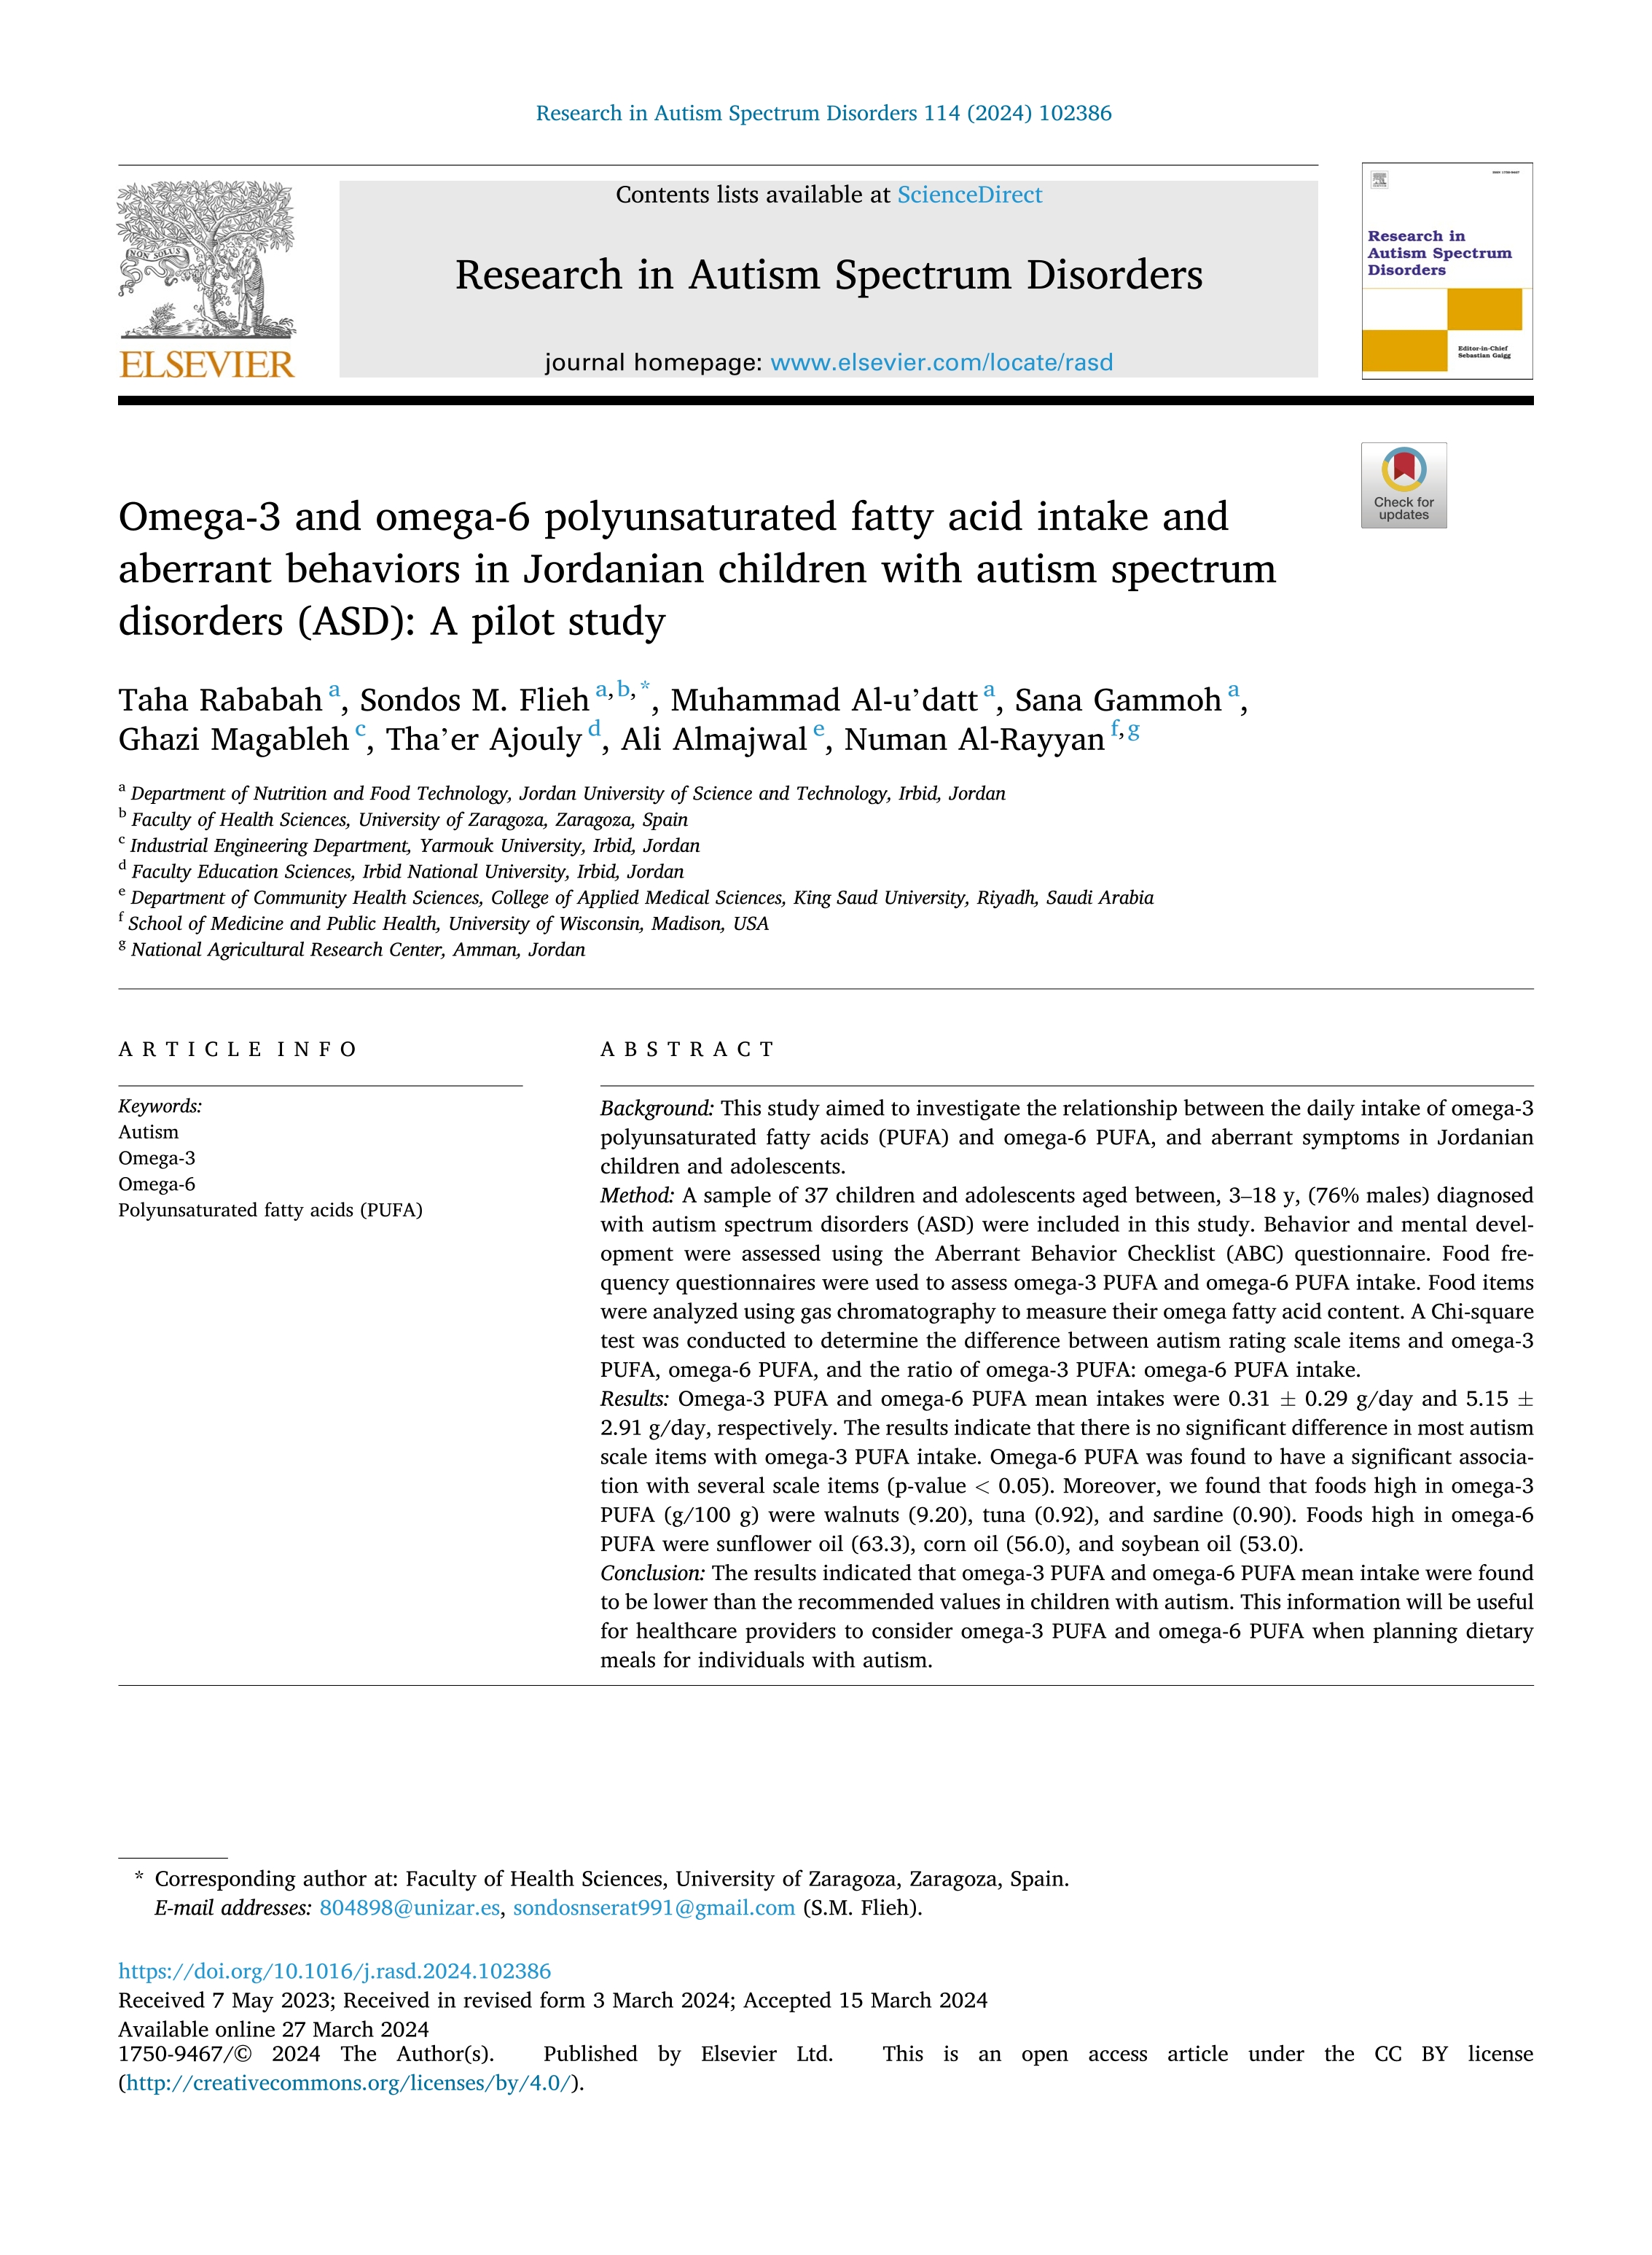 Omega-3 and omega-6 polyunsaturated fatty acid intake and aberrant behaviors in Jordanian children with autism spectrum disorders (ASD): A pilot study